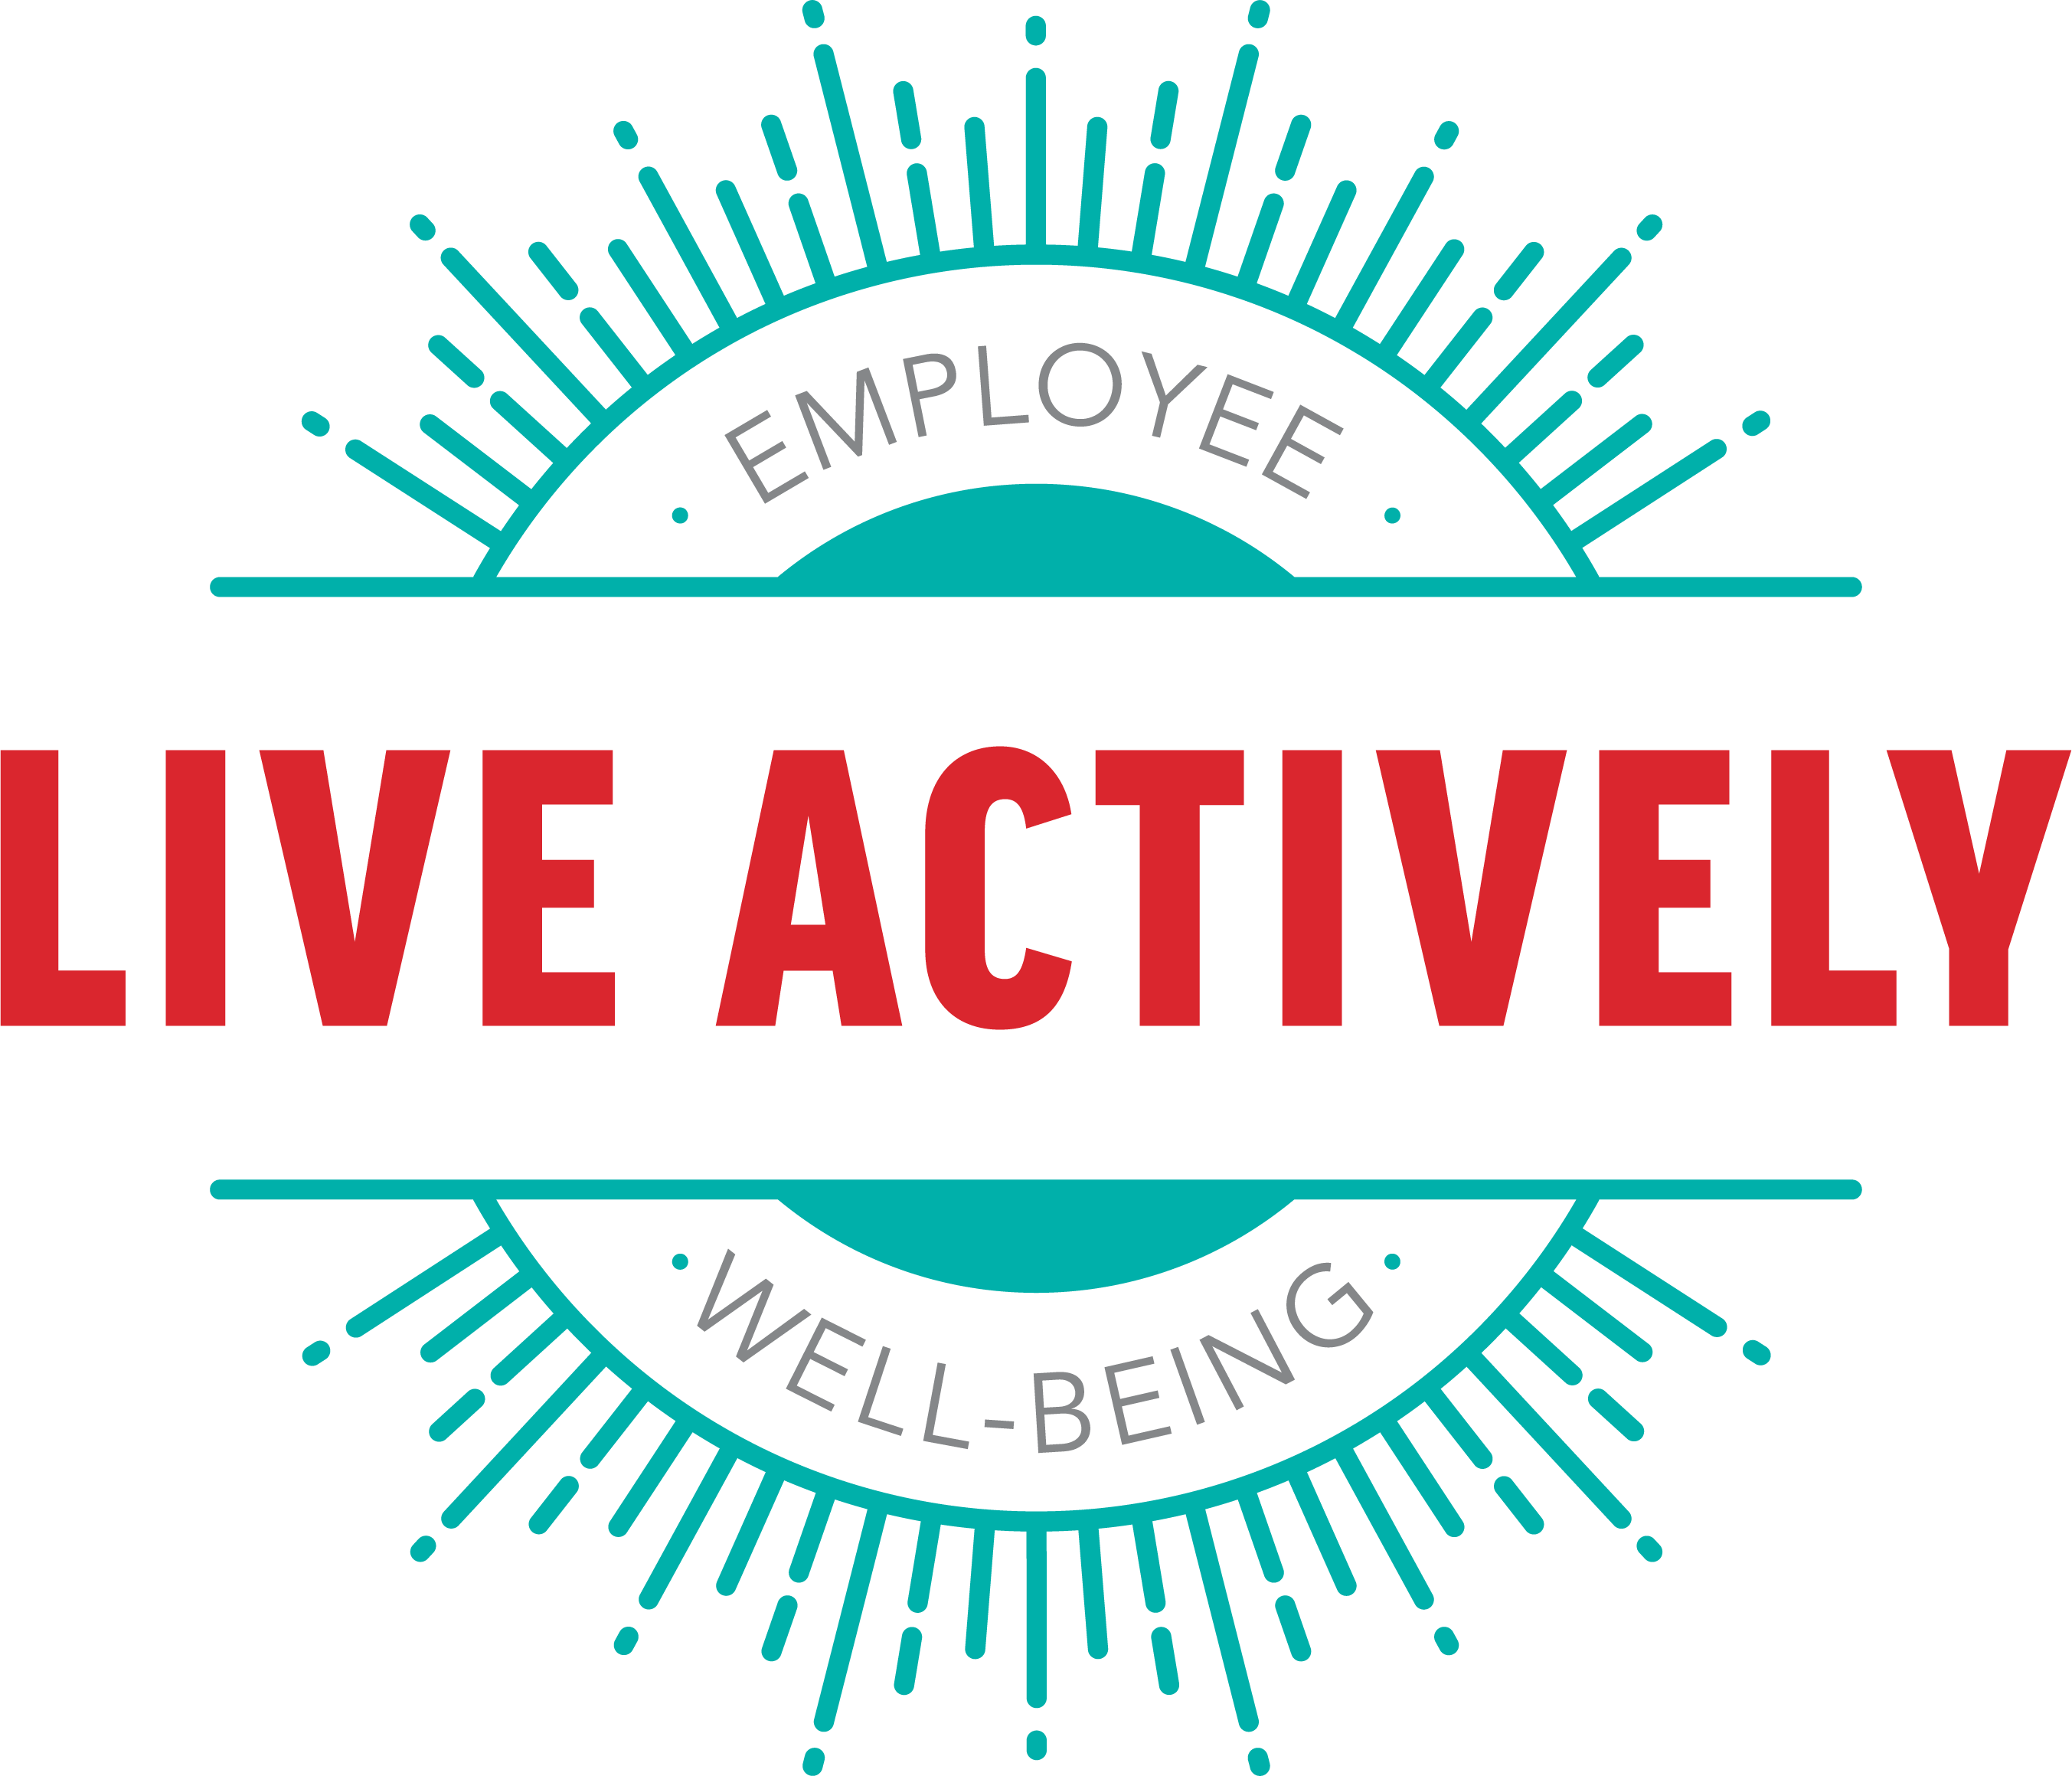 live-actively-employee-final